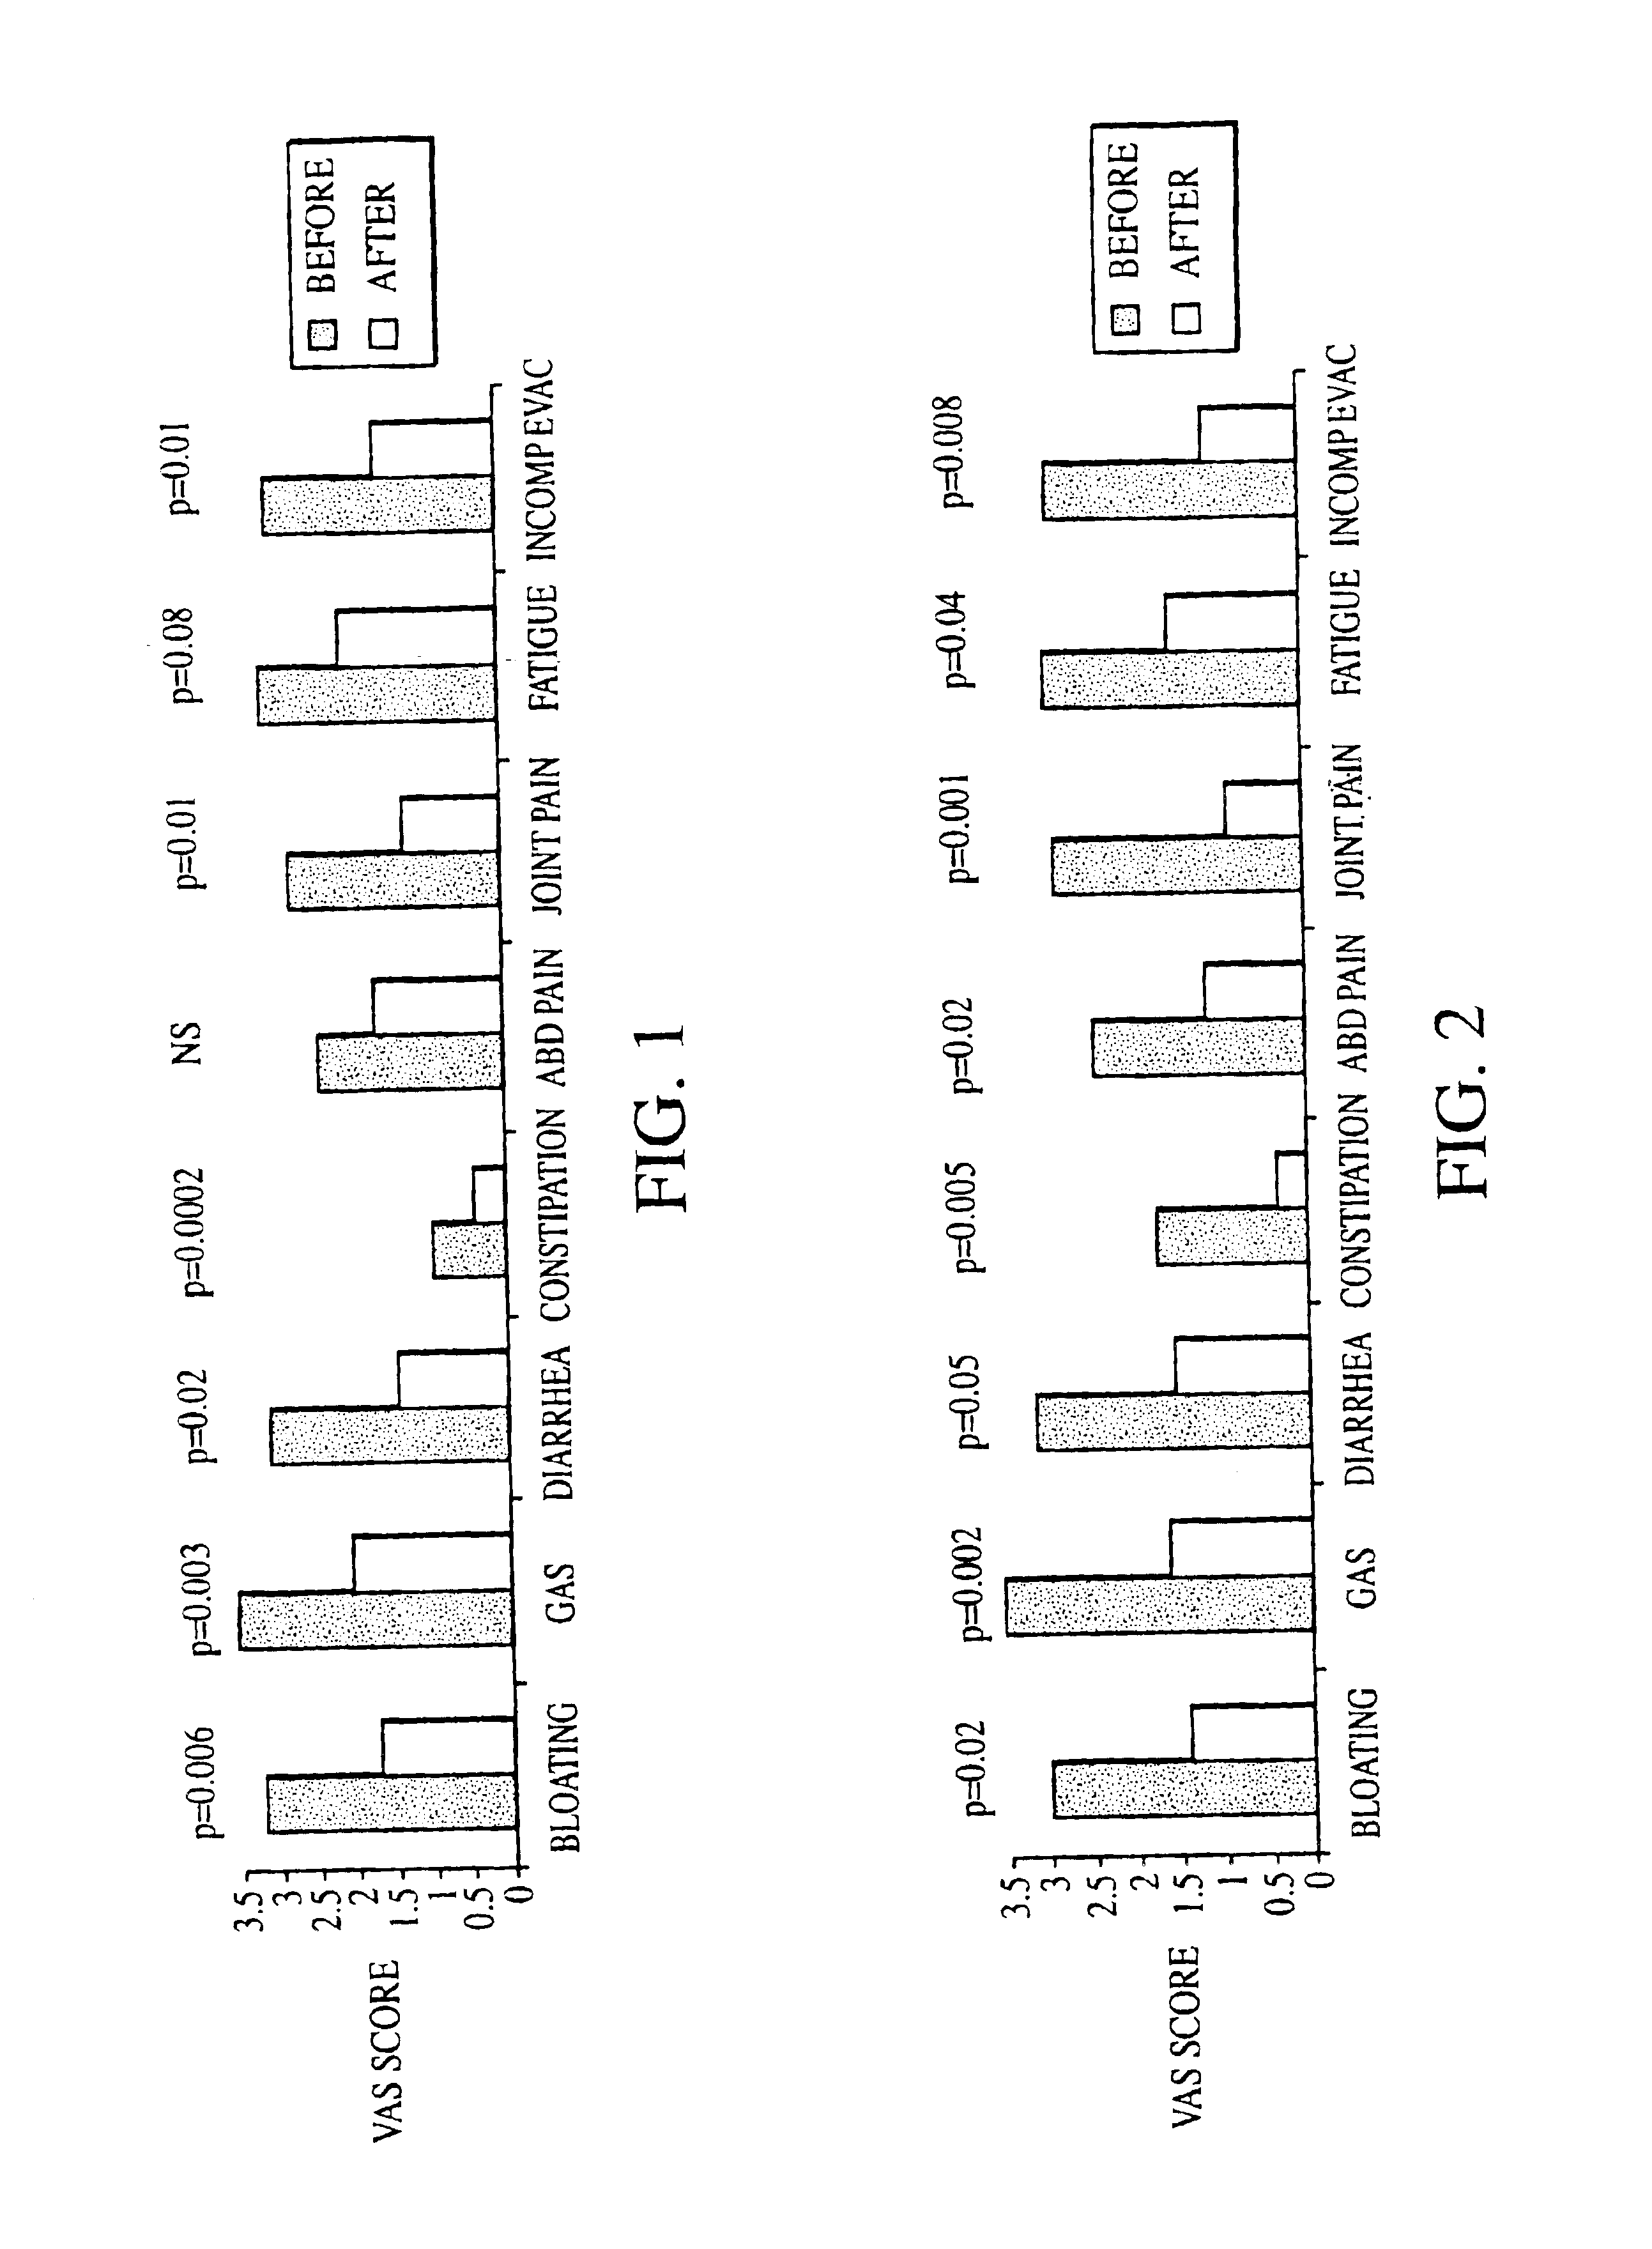 Methods of diagnosing or treating irritable bowel syndrome and other disorders caused by small intestinal bacterial overgrowth